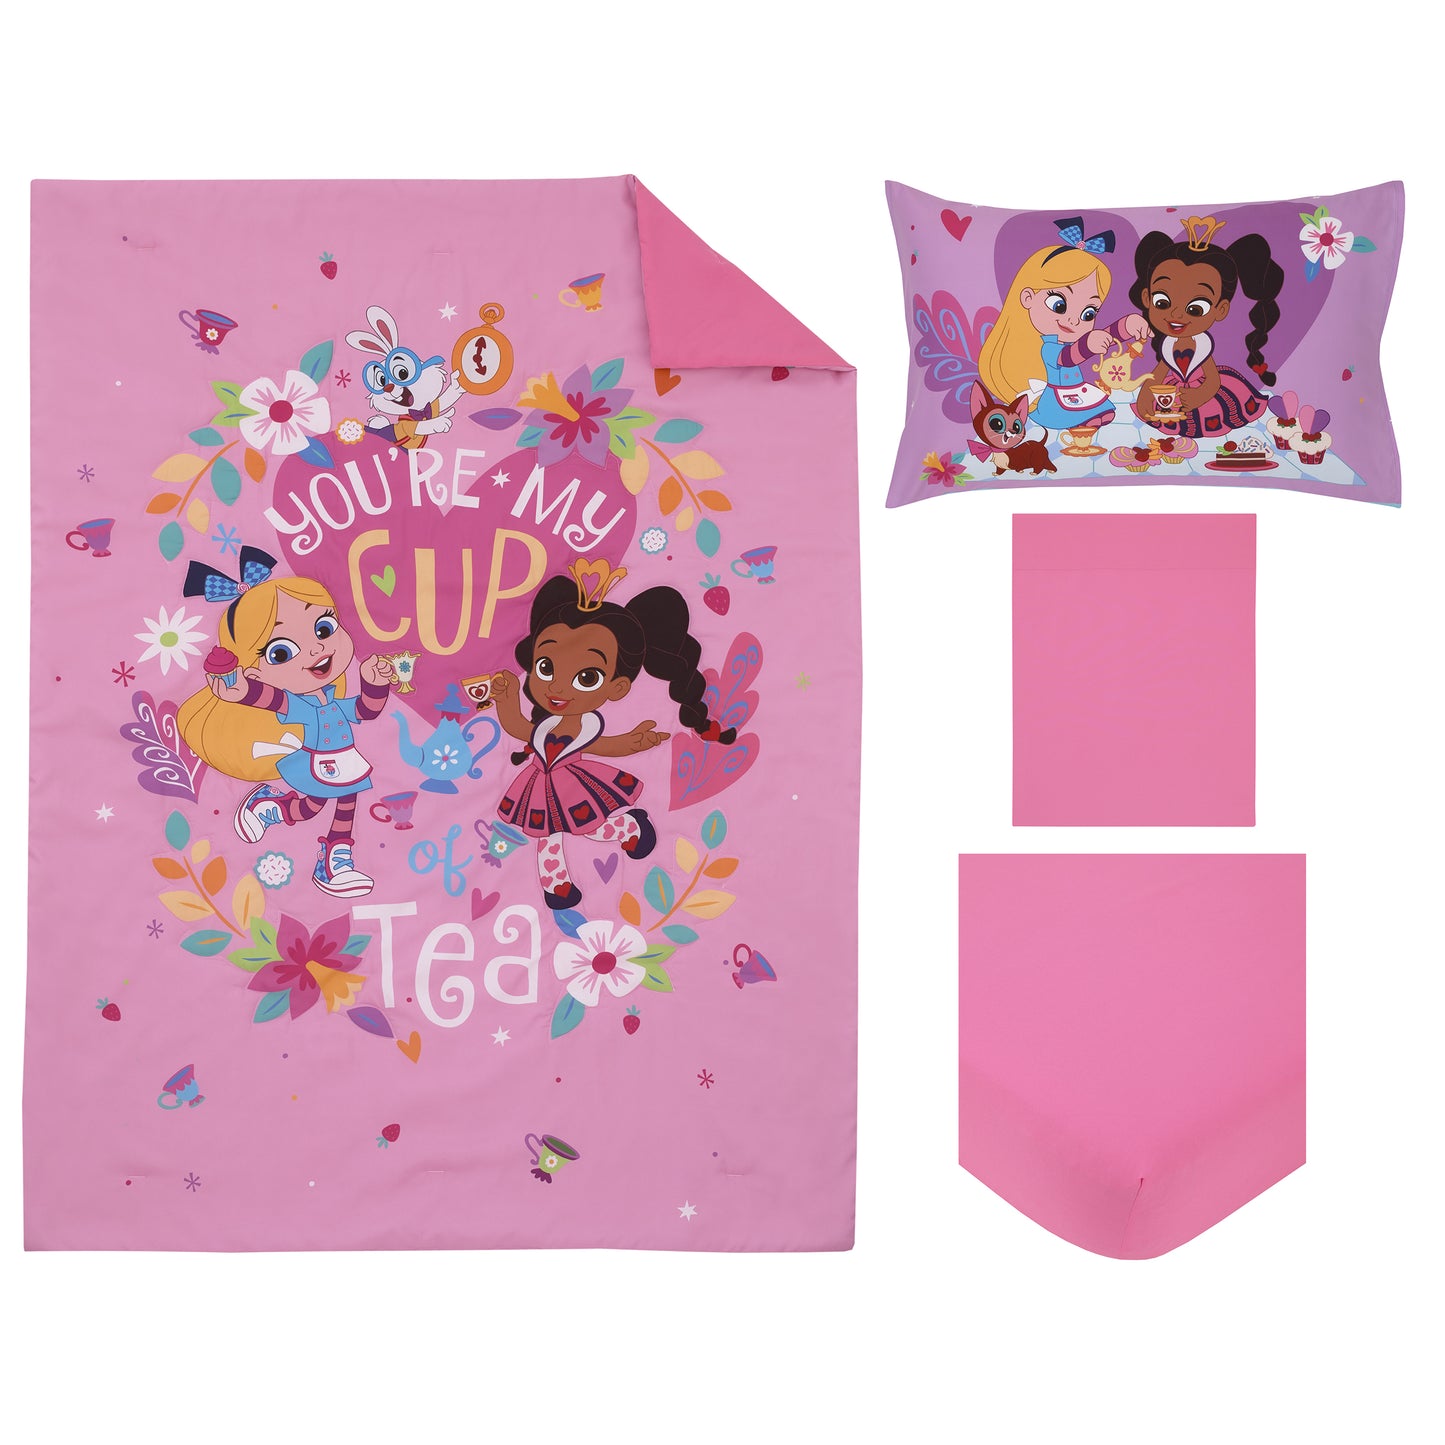 Disney Alice's Wonderland Bakery Tea Party Pink and Purple 4 Piece Toddler Bed Set - Comforter, Fitted Bottom Sheet, Flat Top Sheet, and Reversible Pillowcase